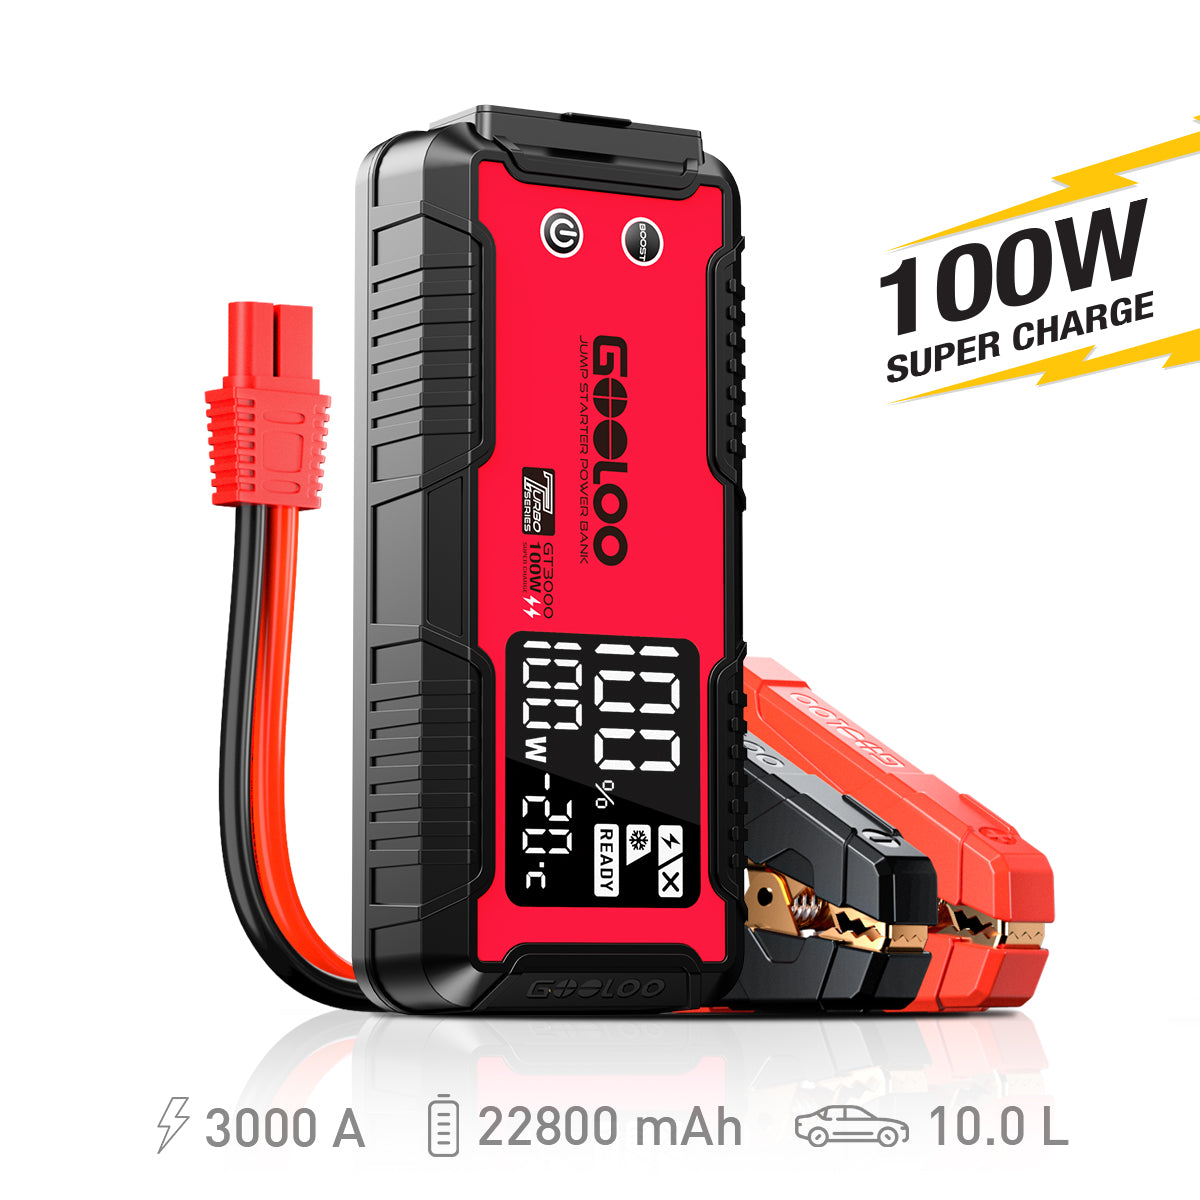 100W Two-Way Charging GT3000 Set